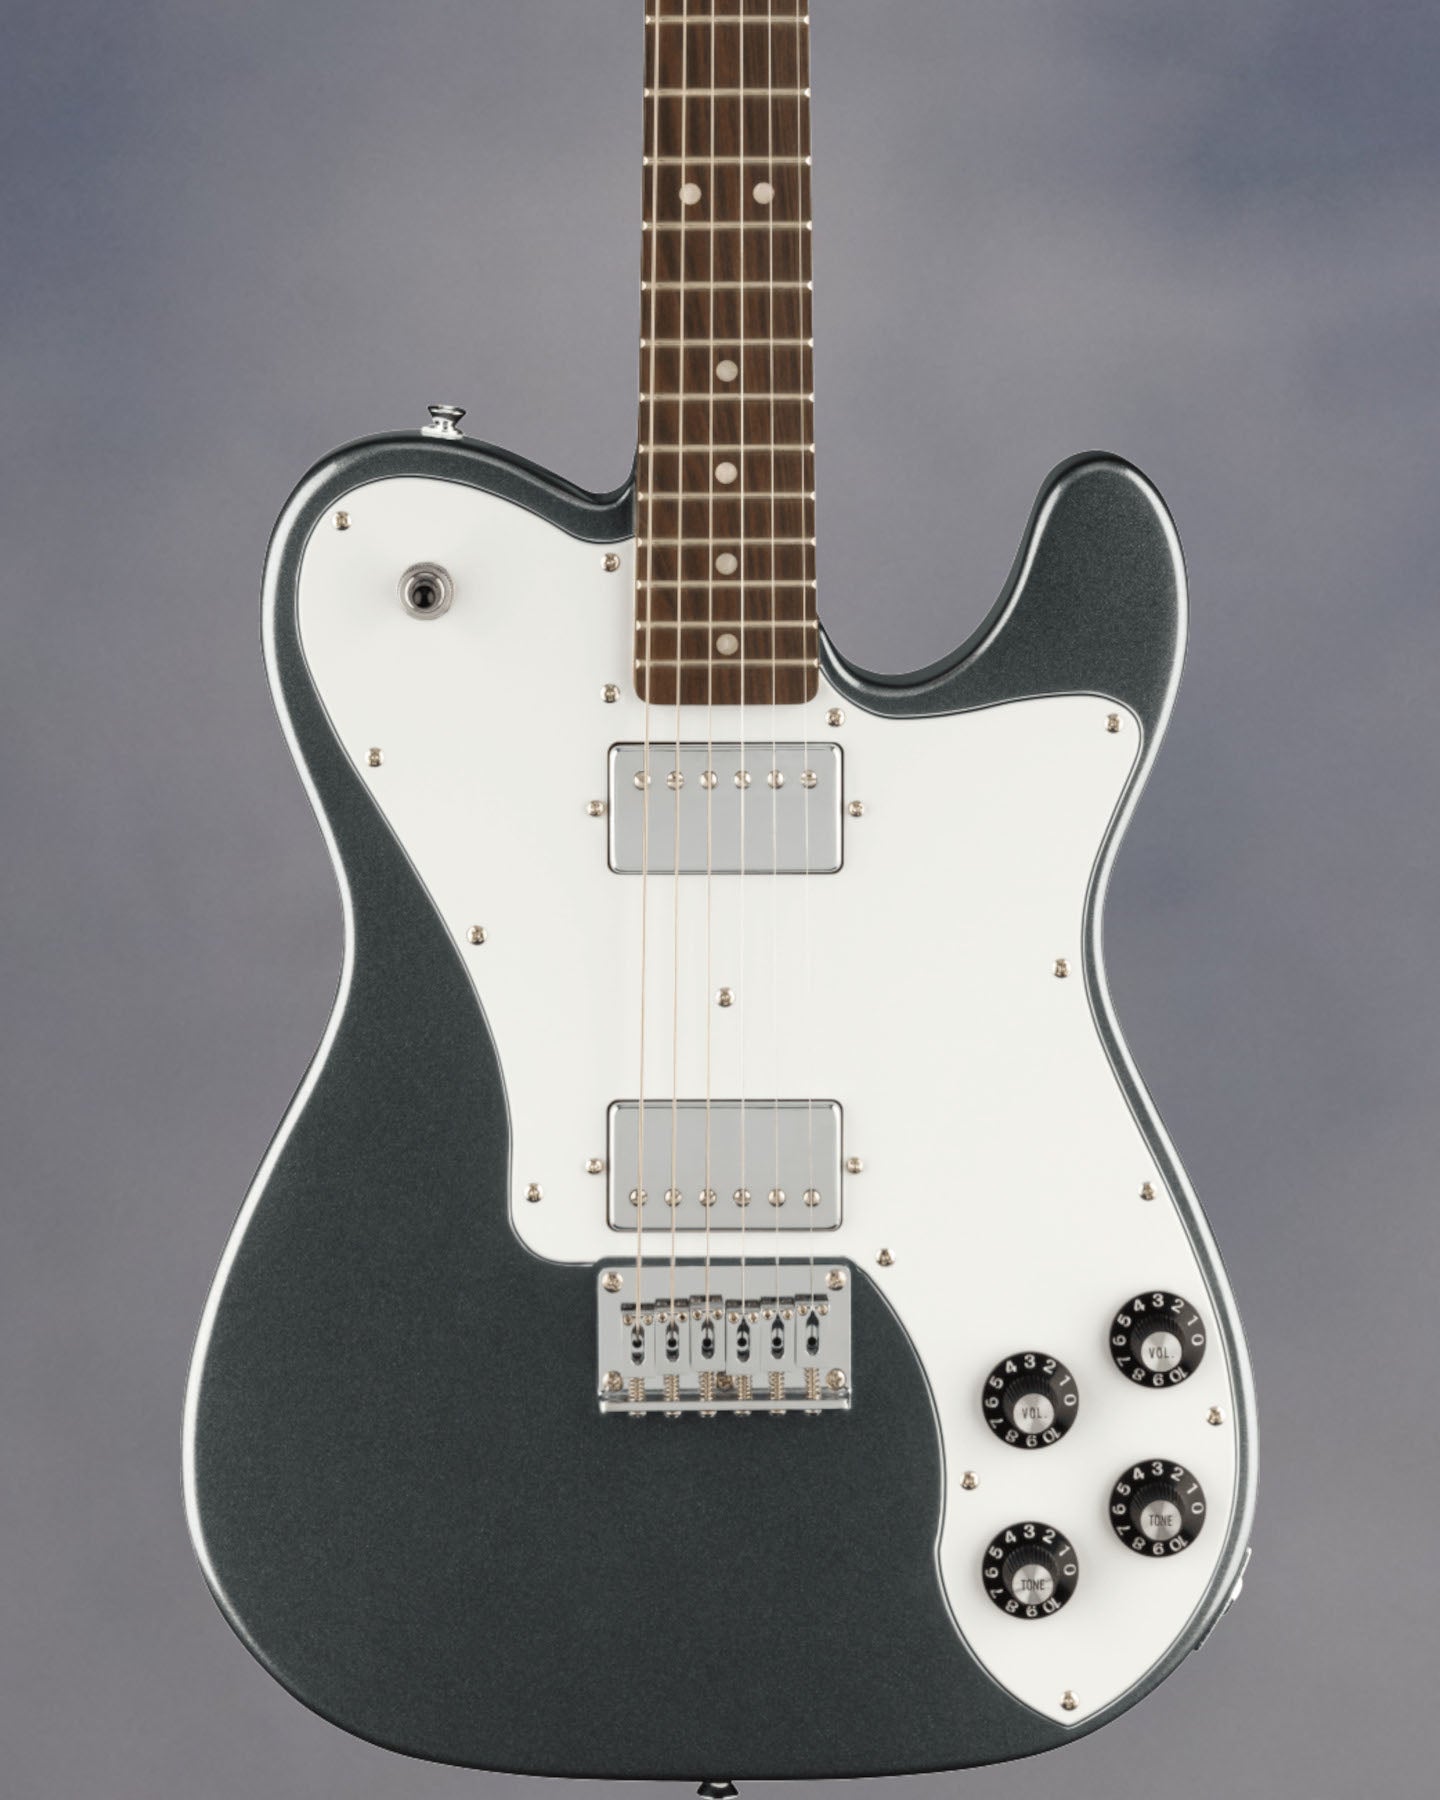 Affinity Series Telecaster Deluxe, Charcoal Frost Metalic